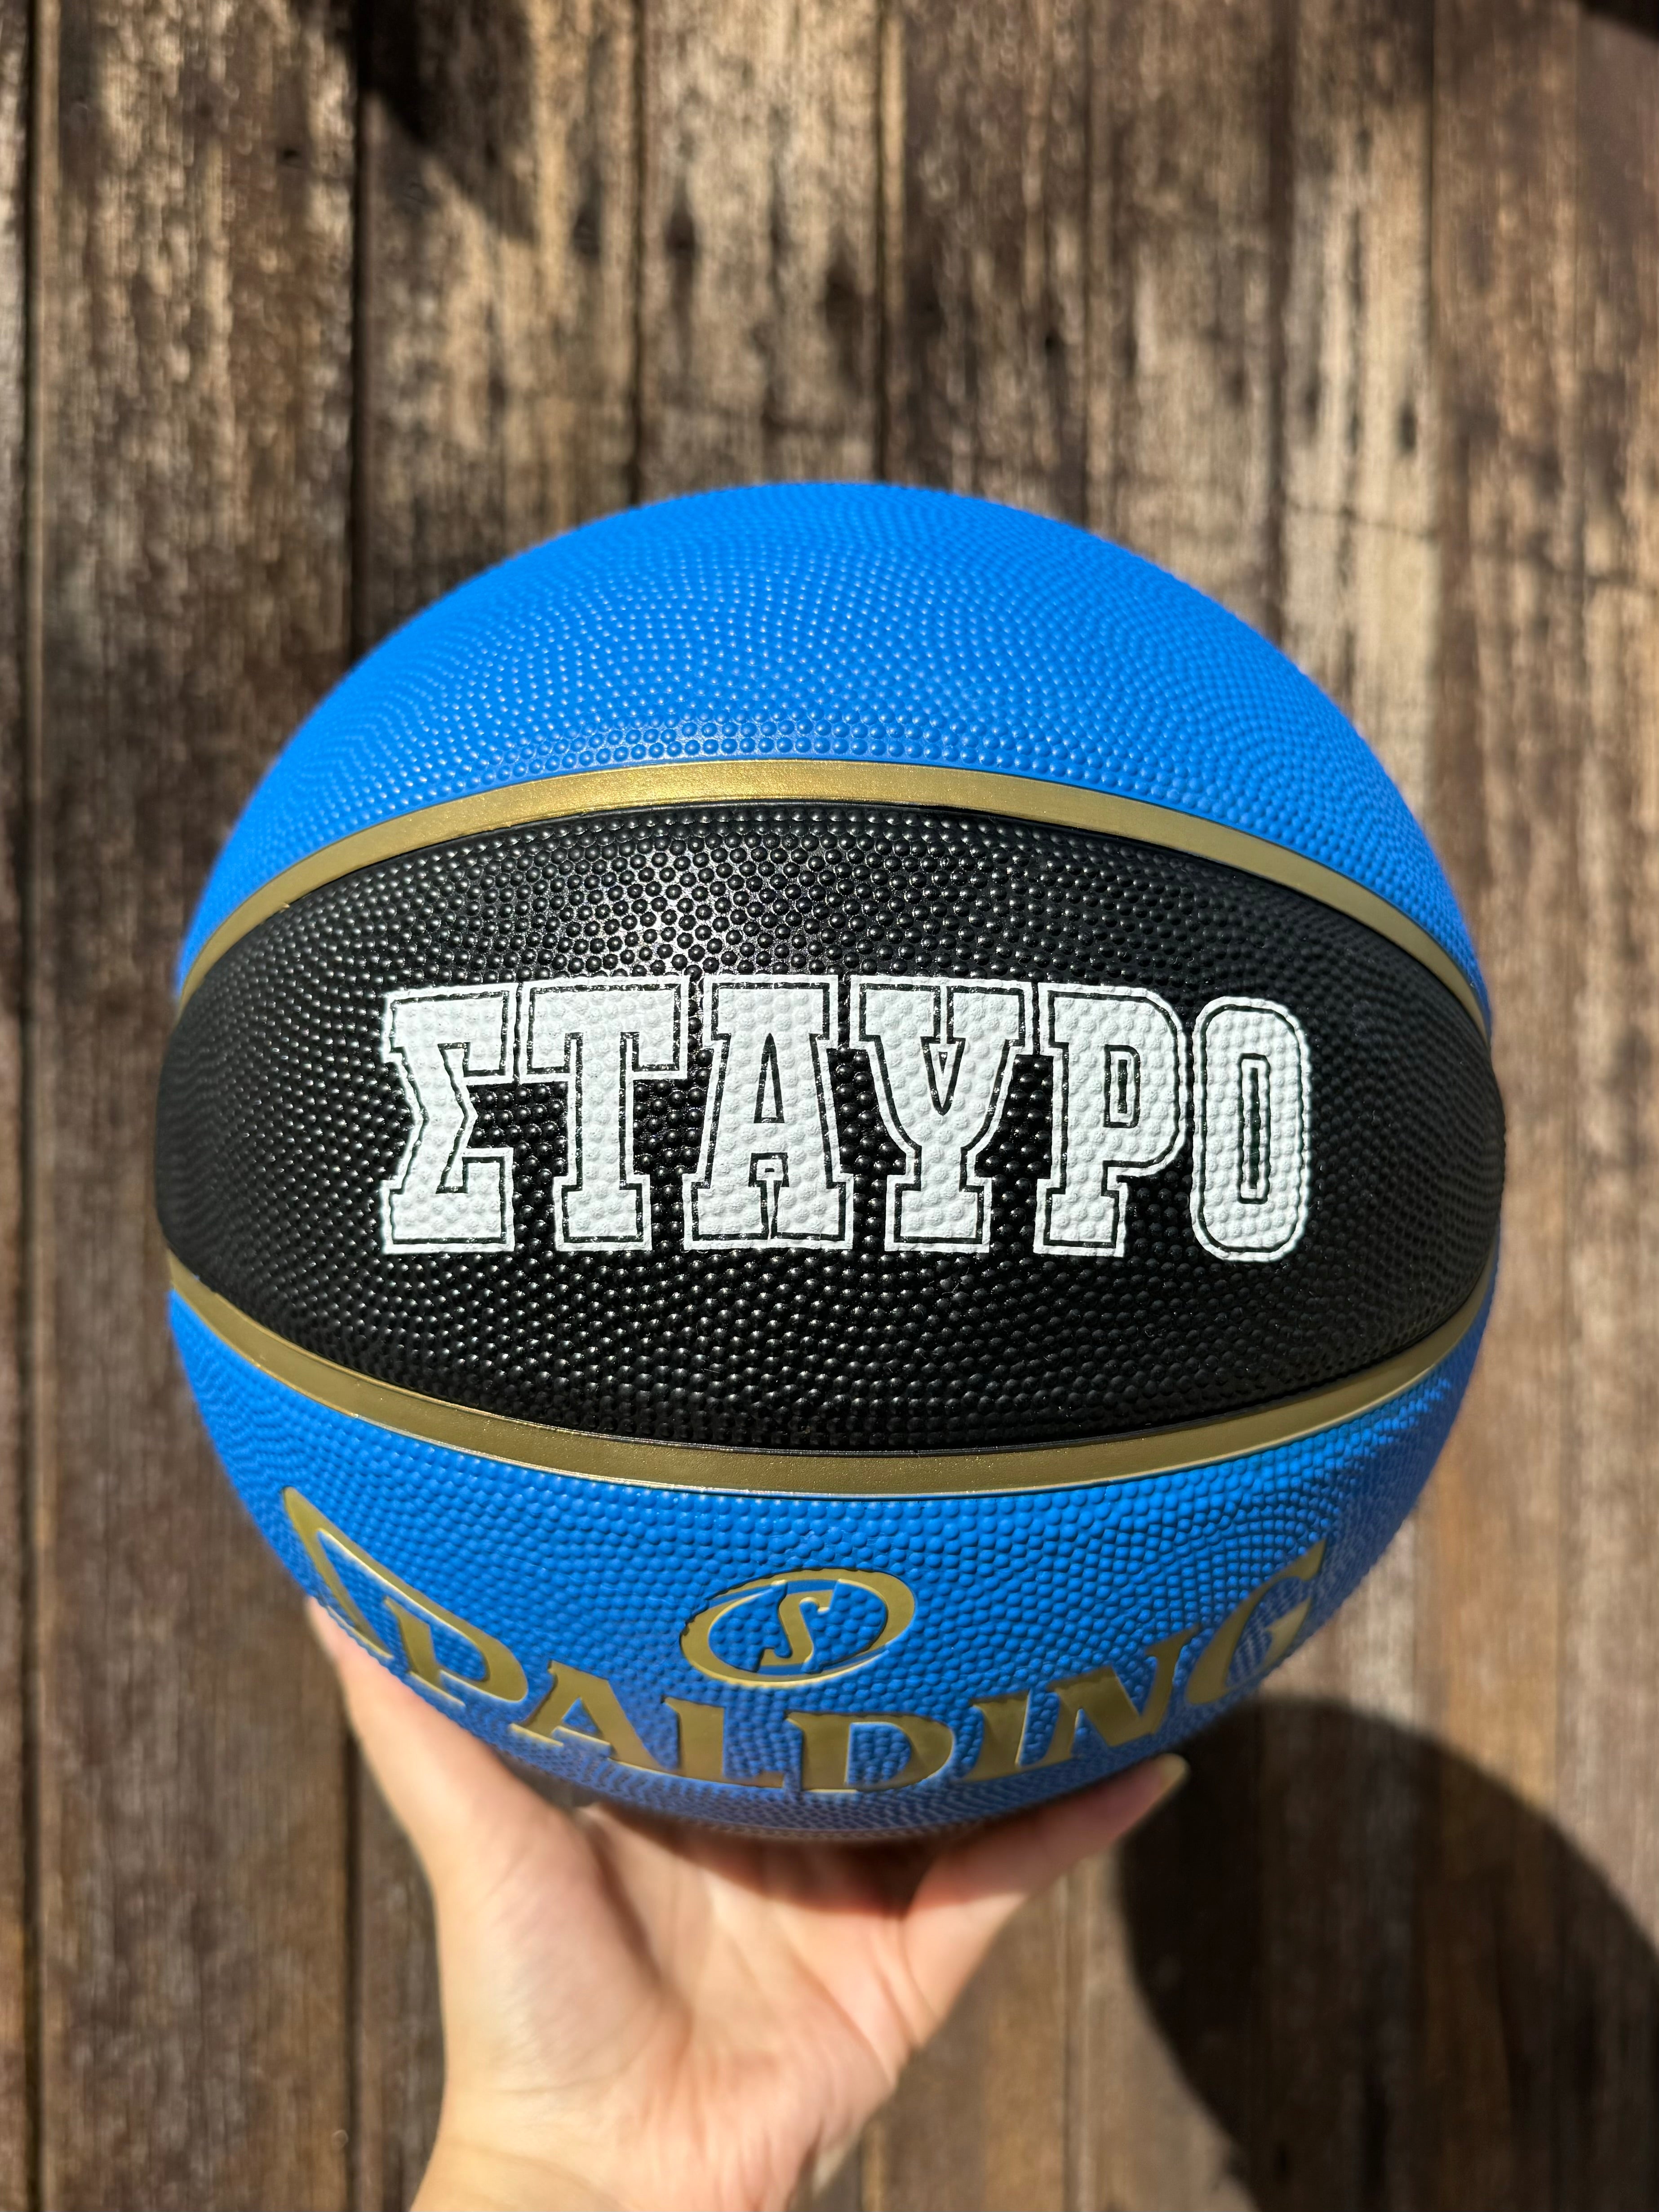 Personalised Spalding Rubber Basketball Black/Blue (Size 7)